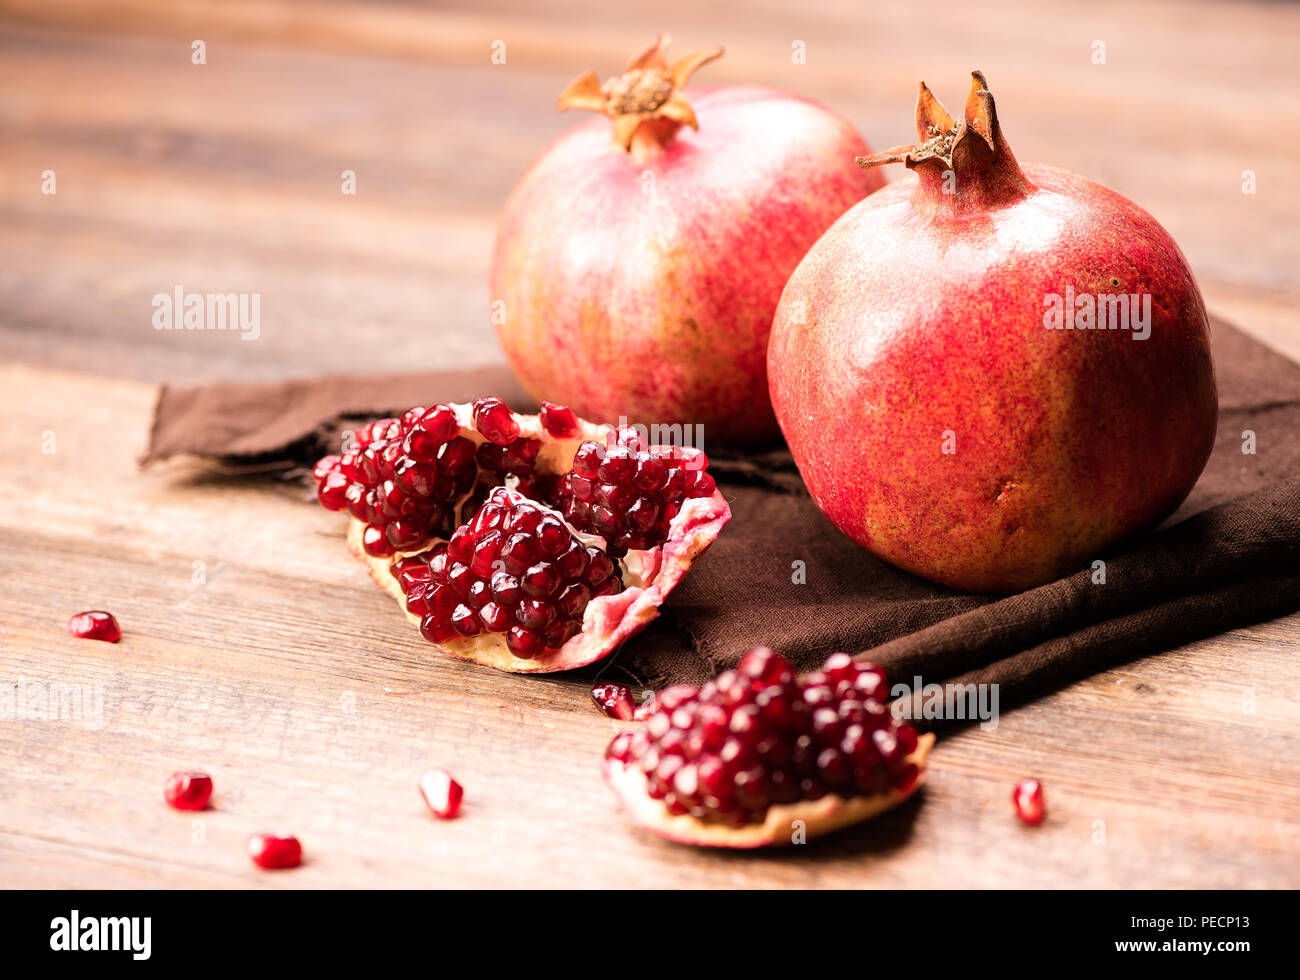 Pomegranate fruits with grains on wooden table. Stock Photo